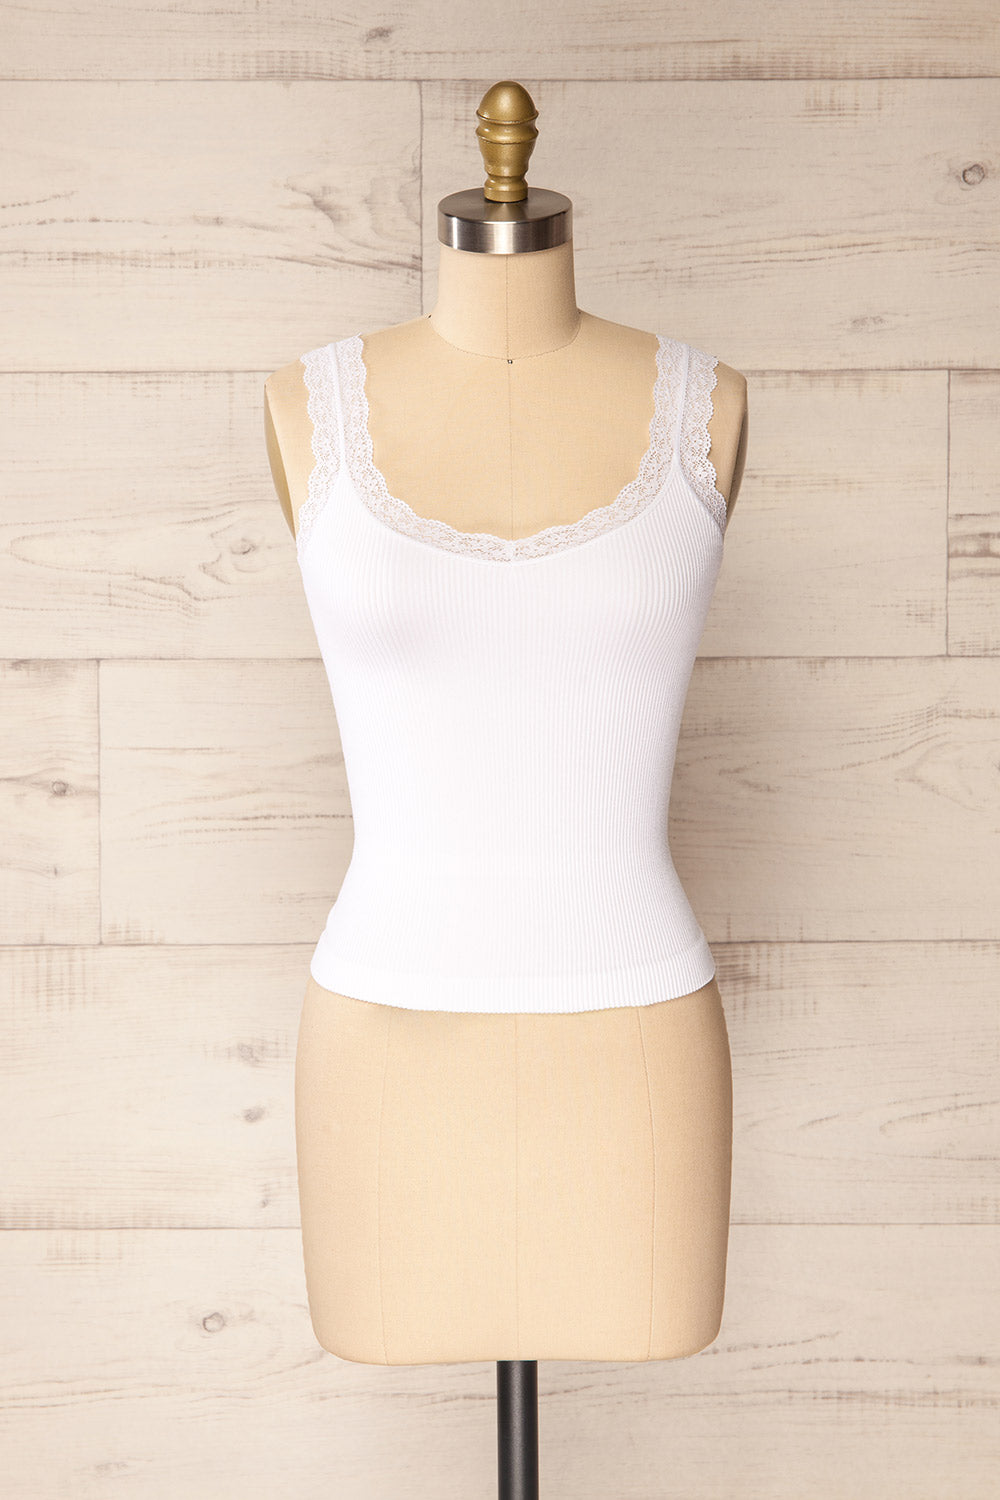 Somensac White | Ribbed Camisole w/ Lace Trim